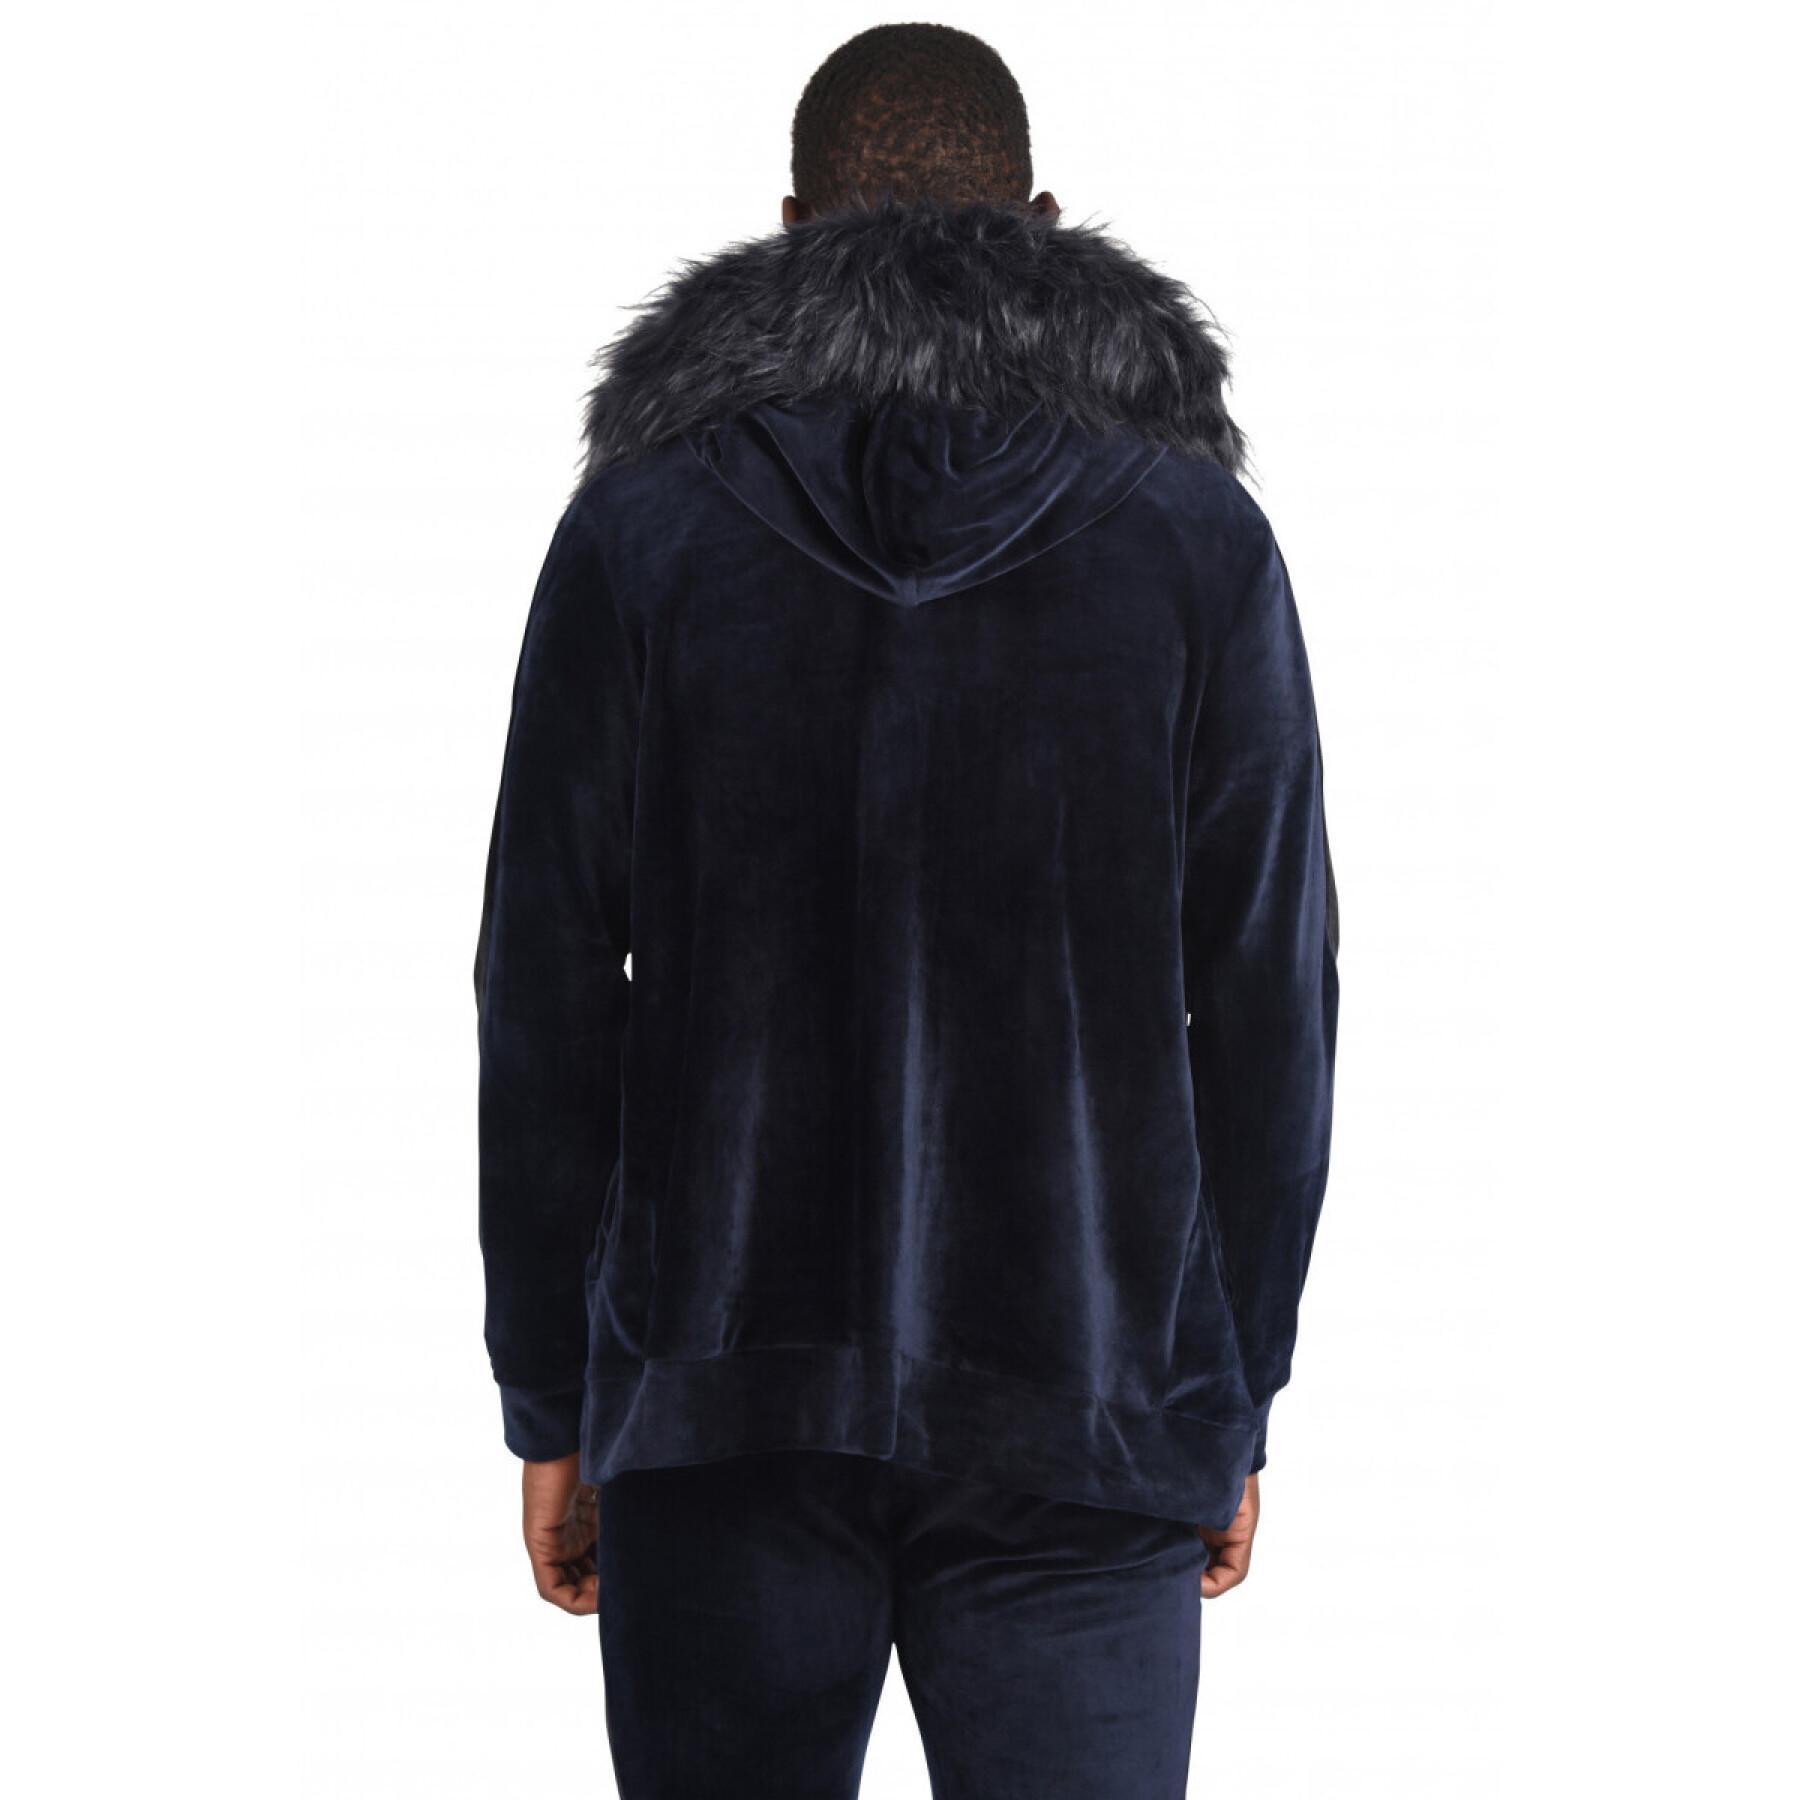 Furry velvet hoodie with side stripes Project X Paris